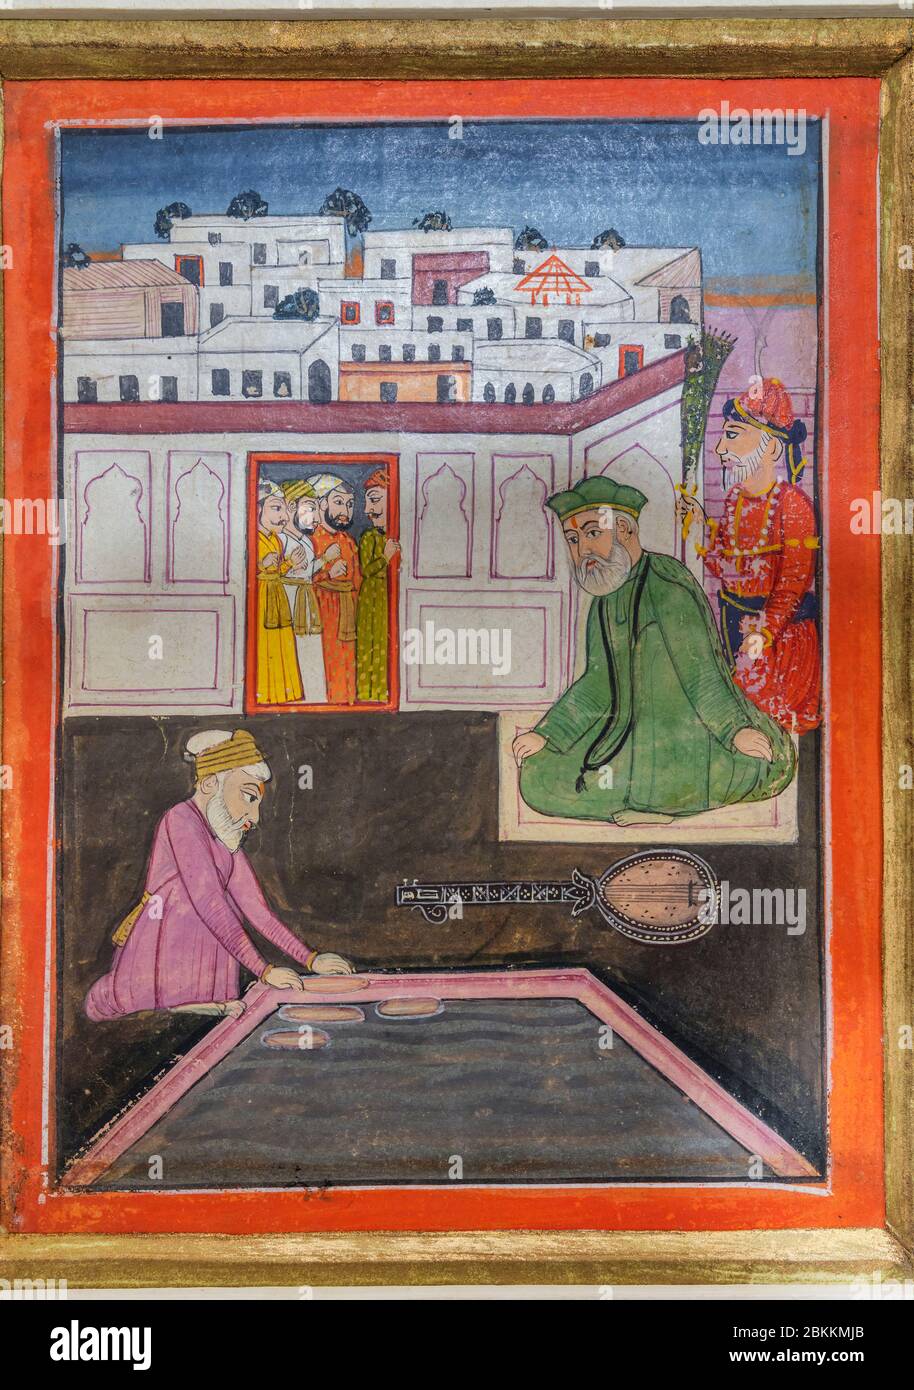 Guru Nanak and the bread cooked by Mardana without fire, 1830s painting, Museum, Delhi, India Stock Photo